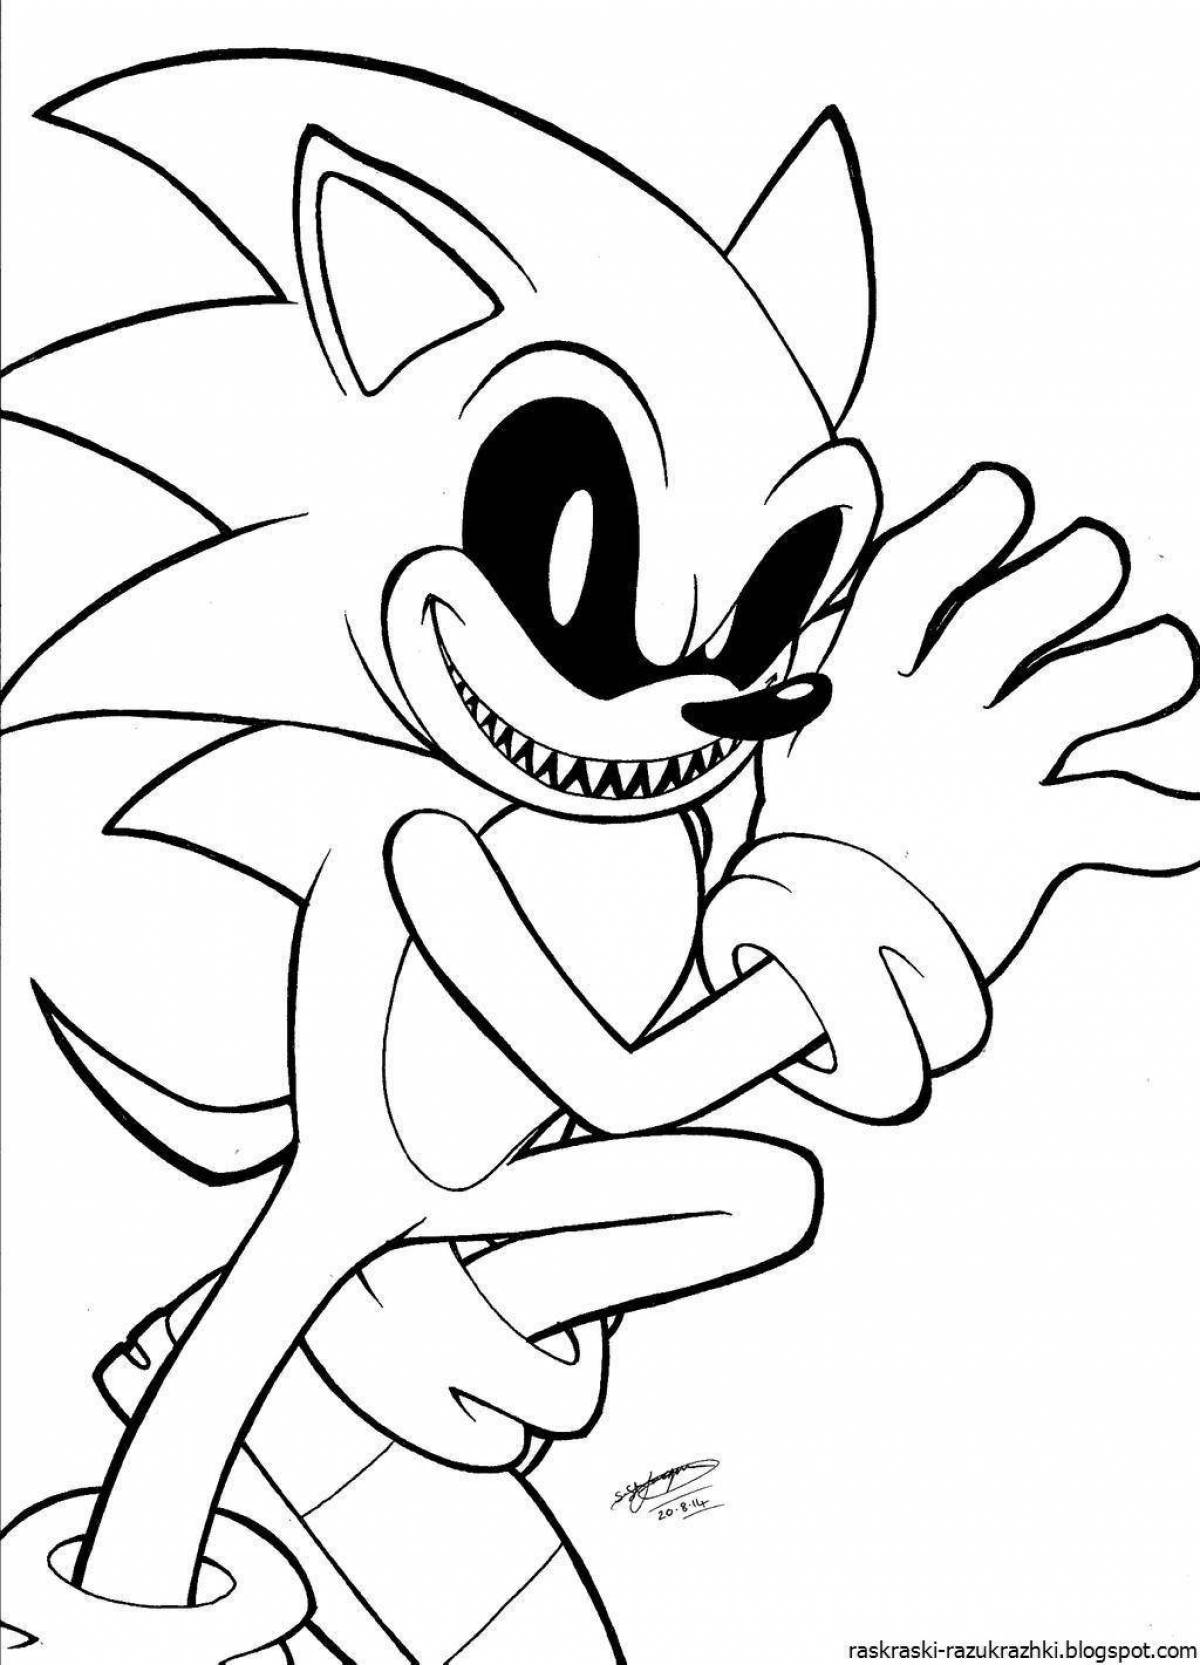 Super sonic exe coloring book